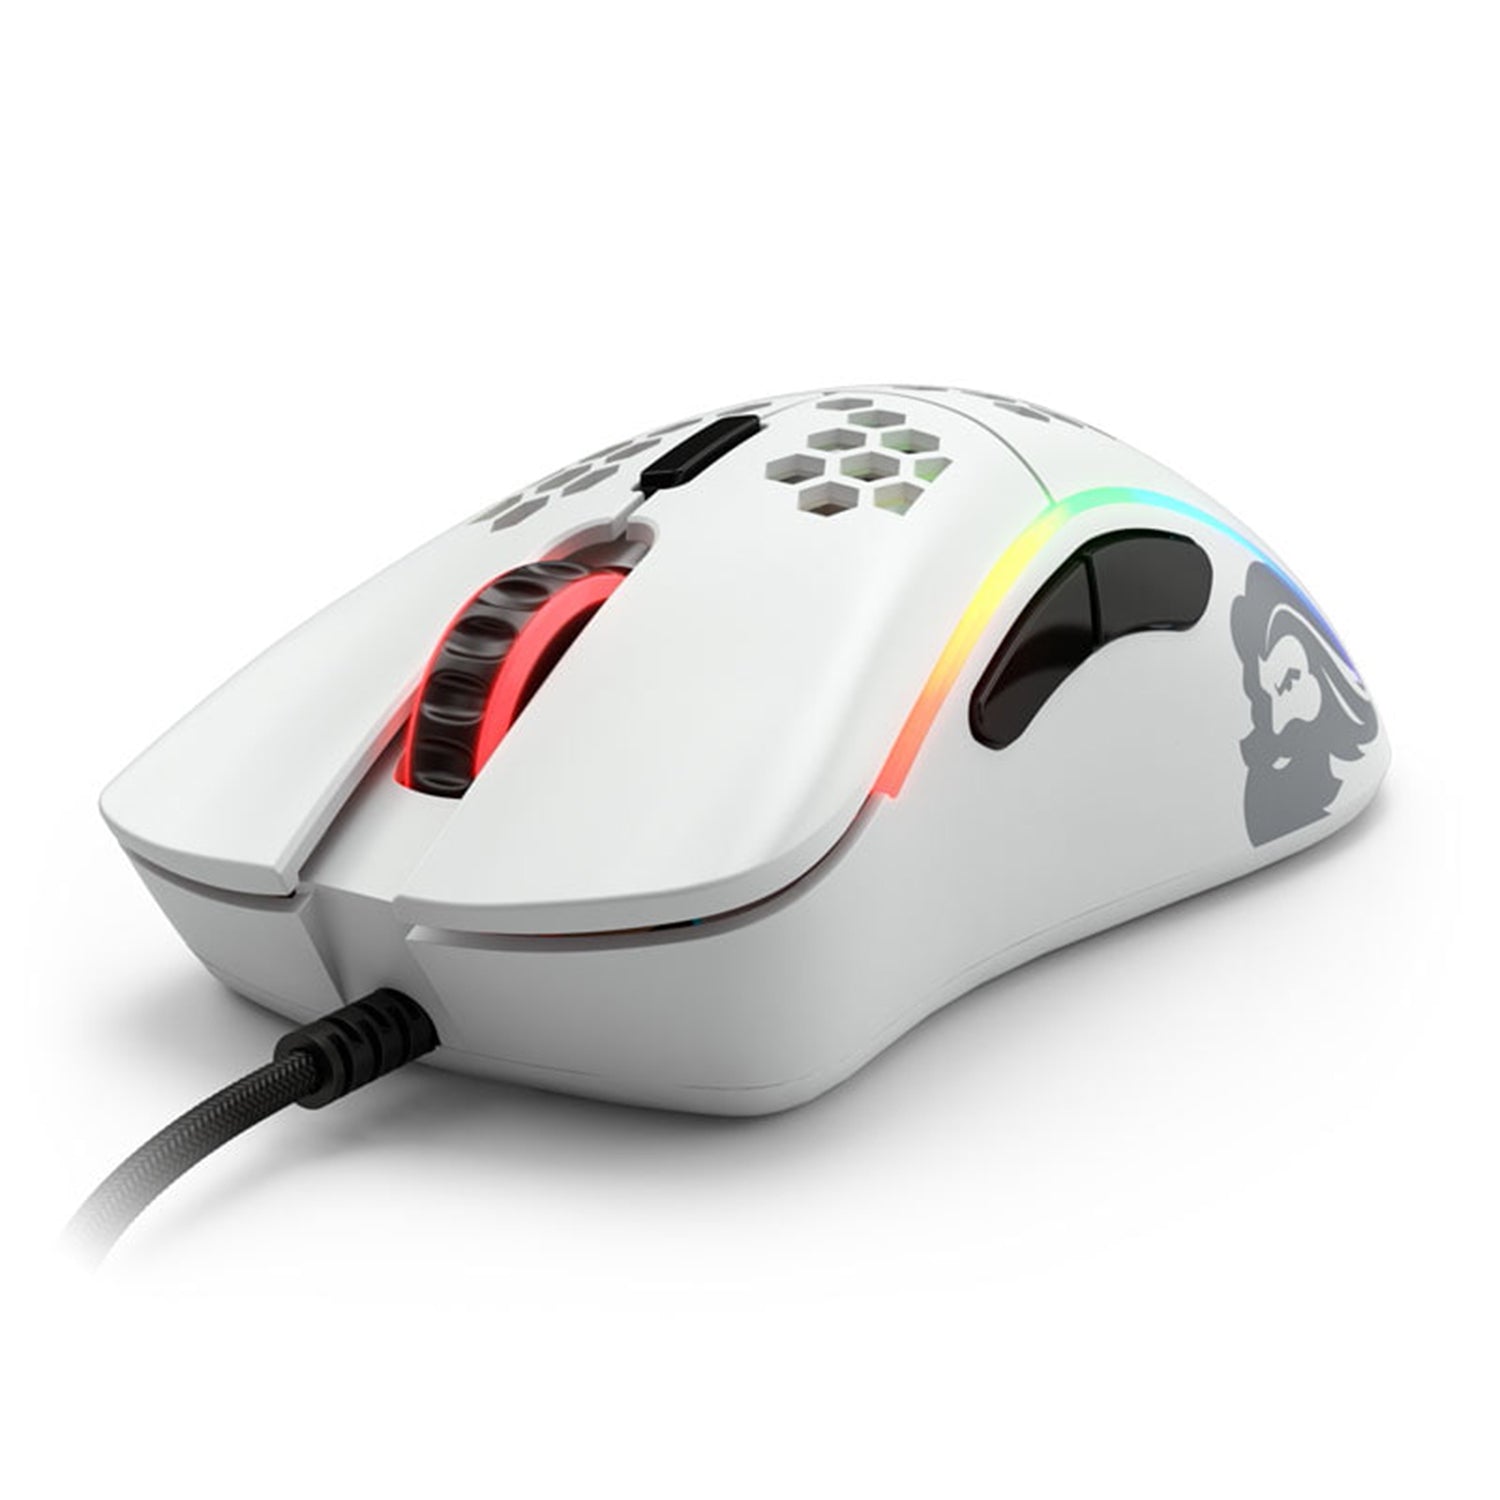 Glorious Model D Mouse Gaming